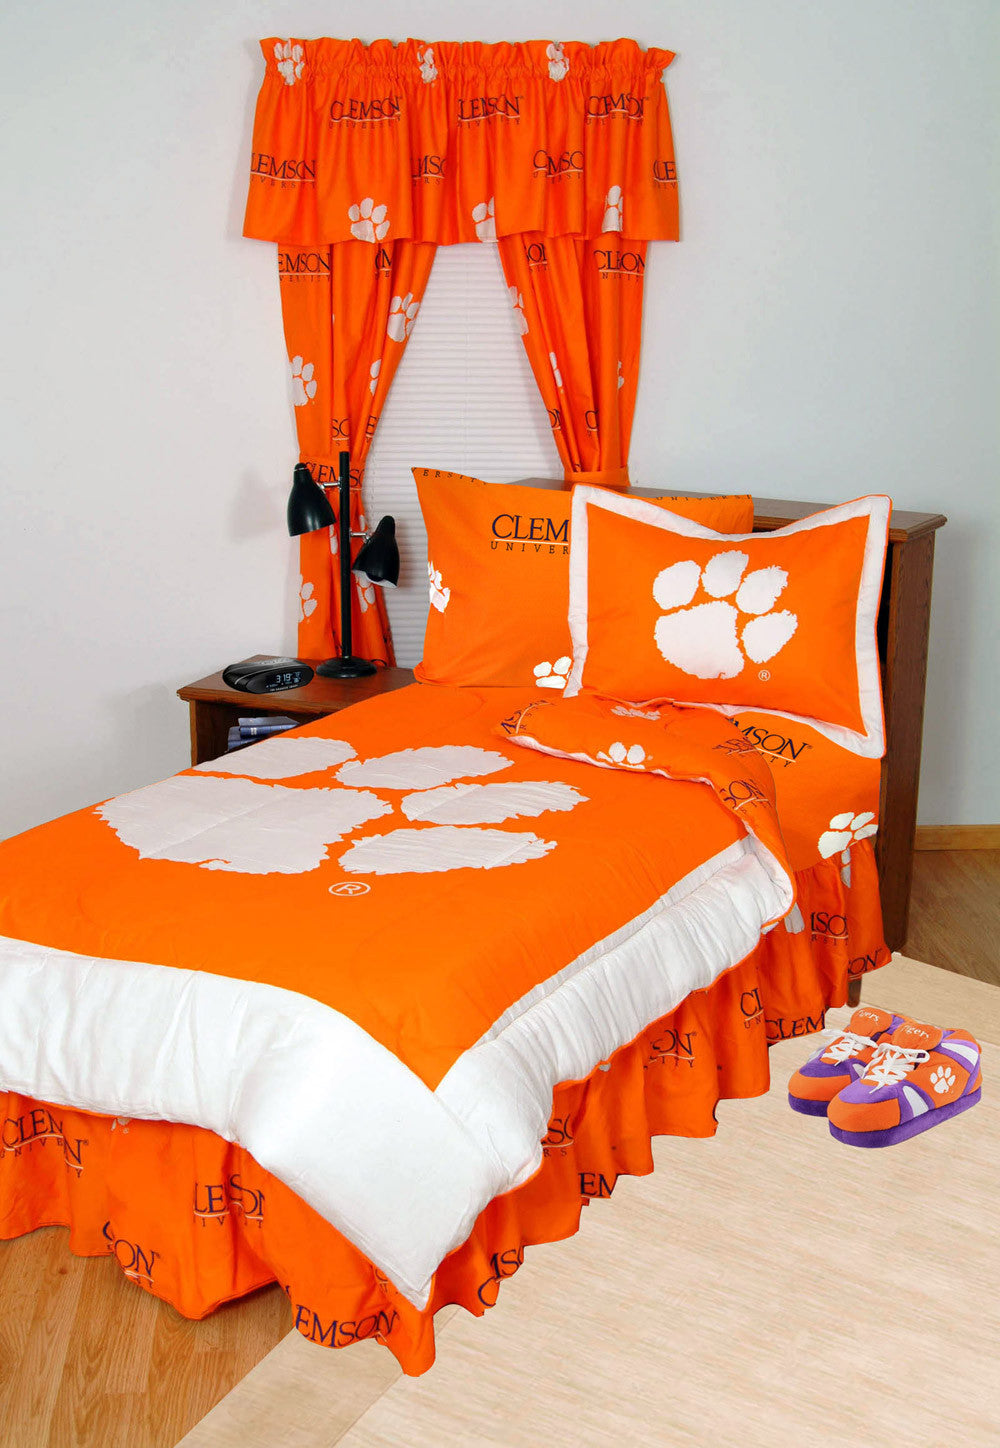 Clemson Bed In A Bag Twin - With Team Colored Sheets - Clebbtw By College Covers